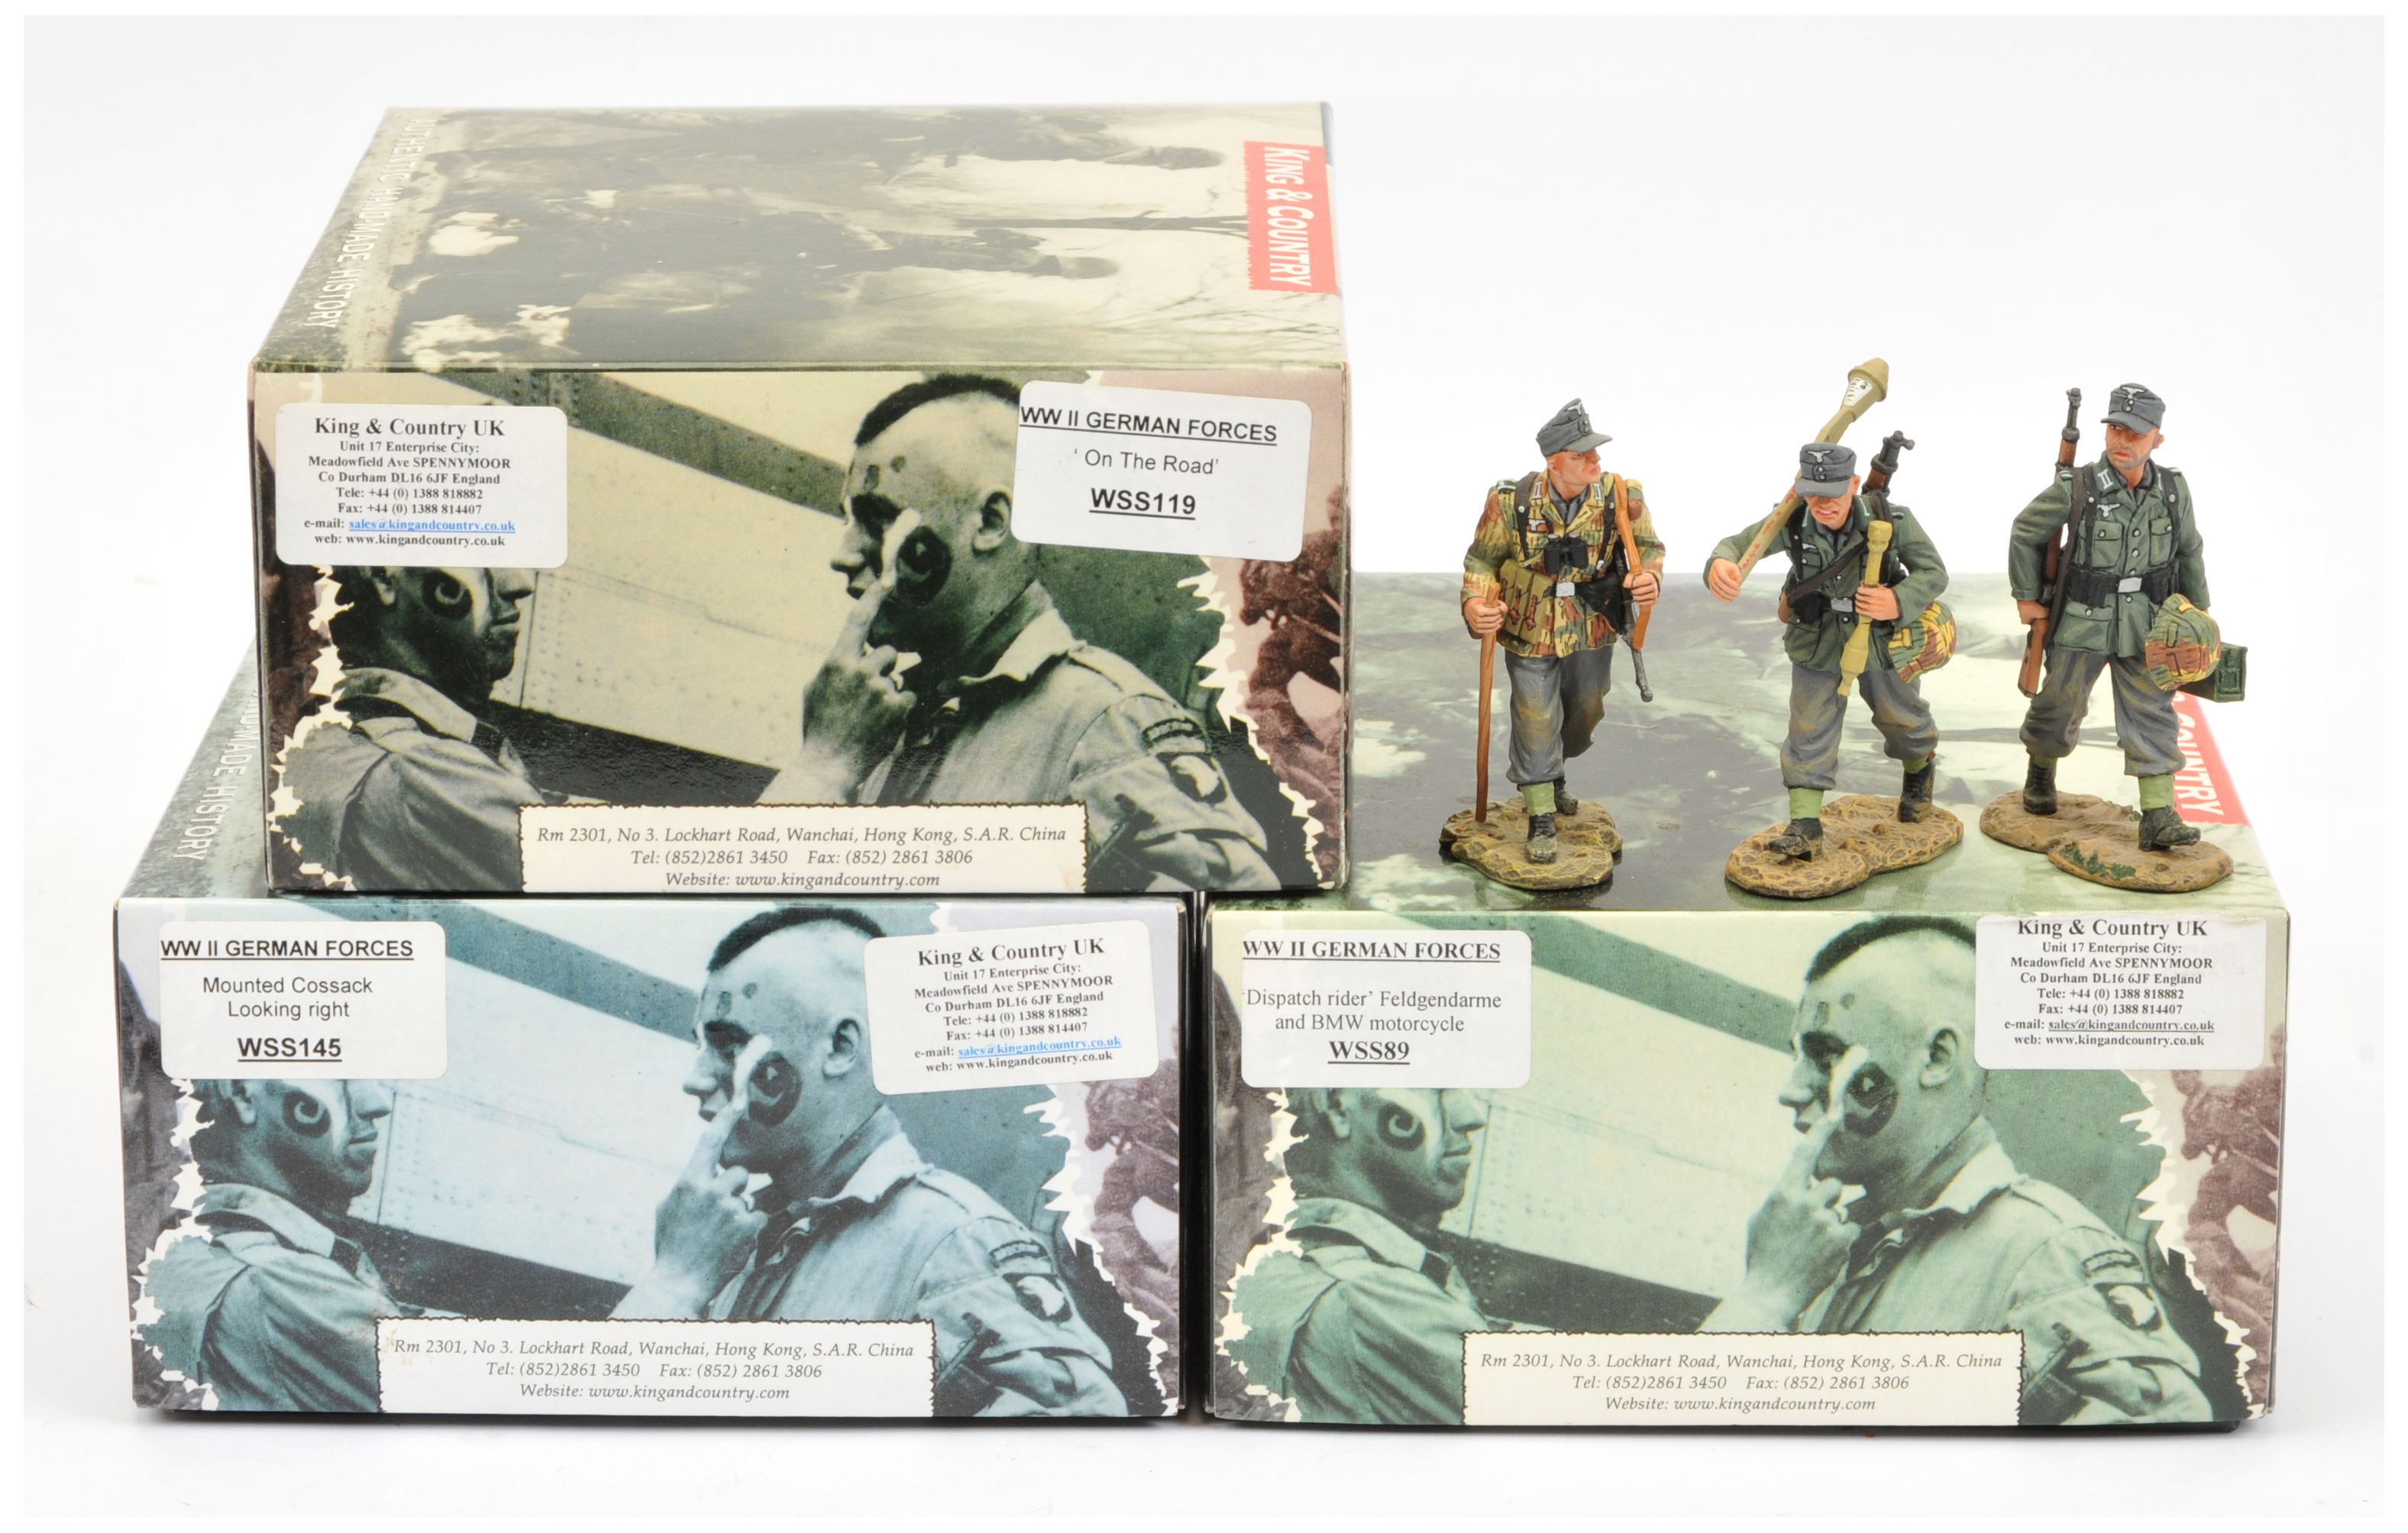 King & Country - 'WW II German Forces' Series, including Set Nos. WSS137 'Discussing the War'